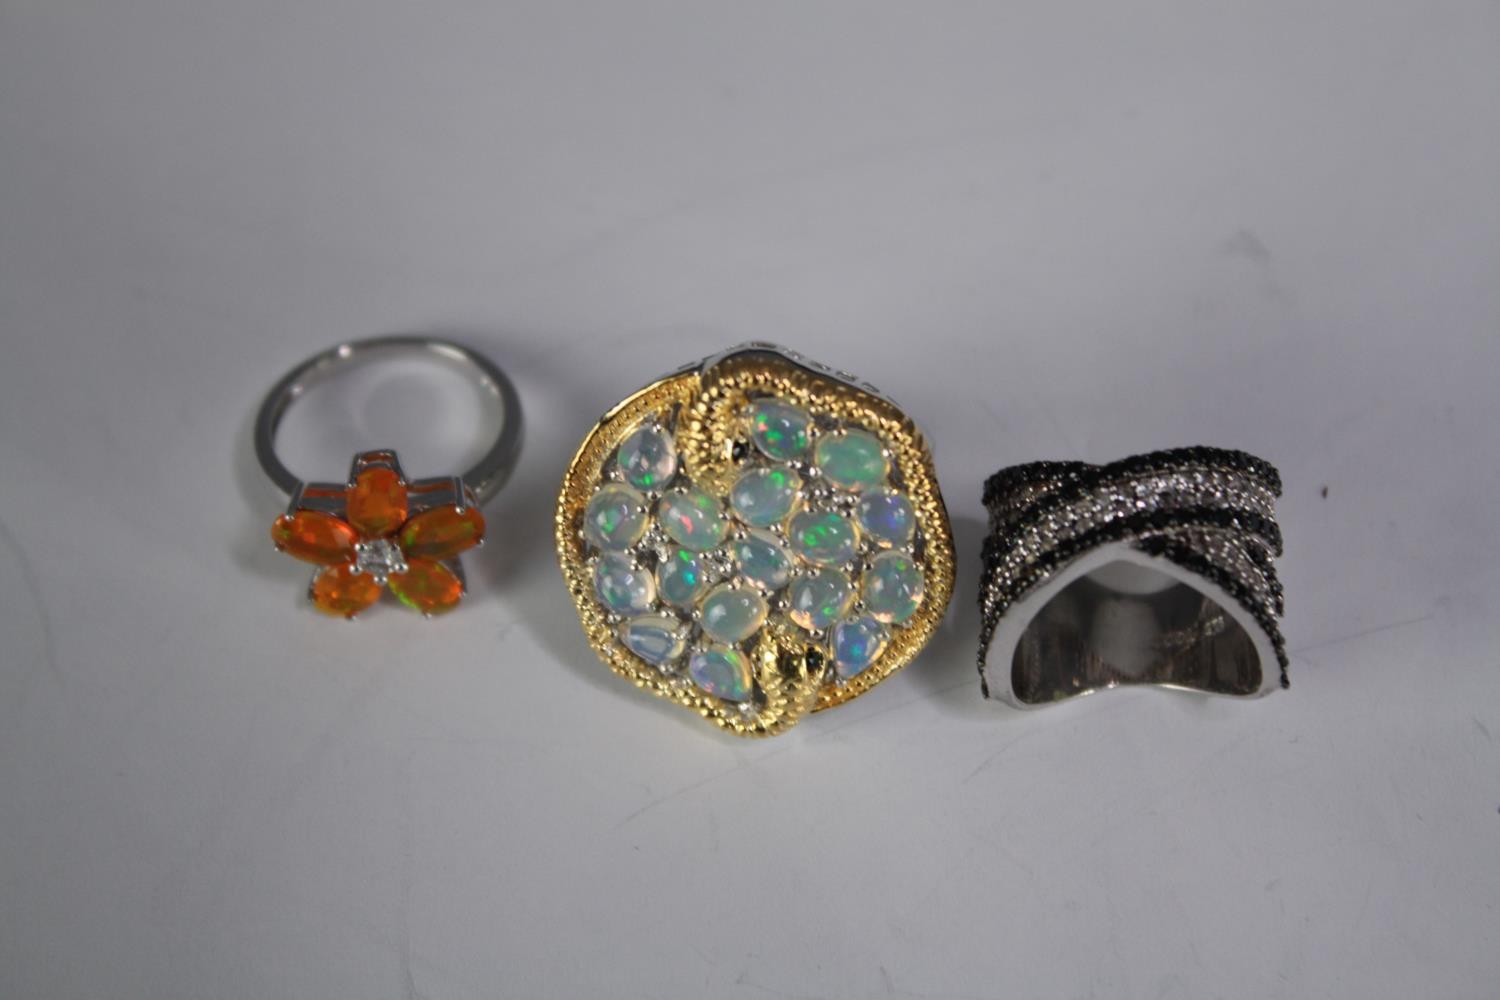 A collection of ten silver gem-set rings of various designs. Set with Fire opal, Turquoise, - Image 2 of 5